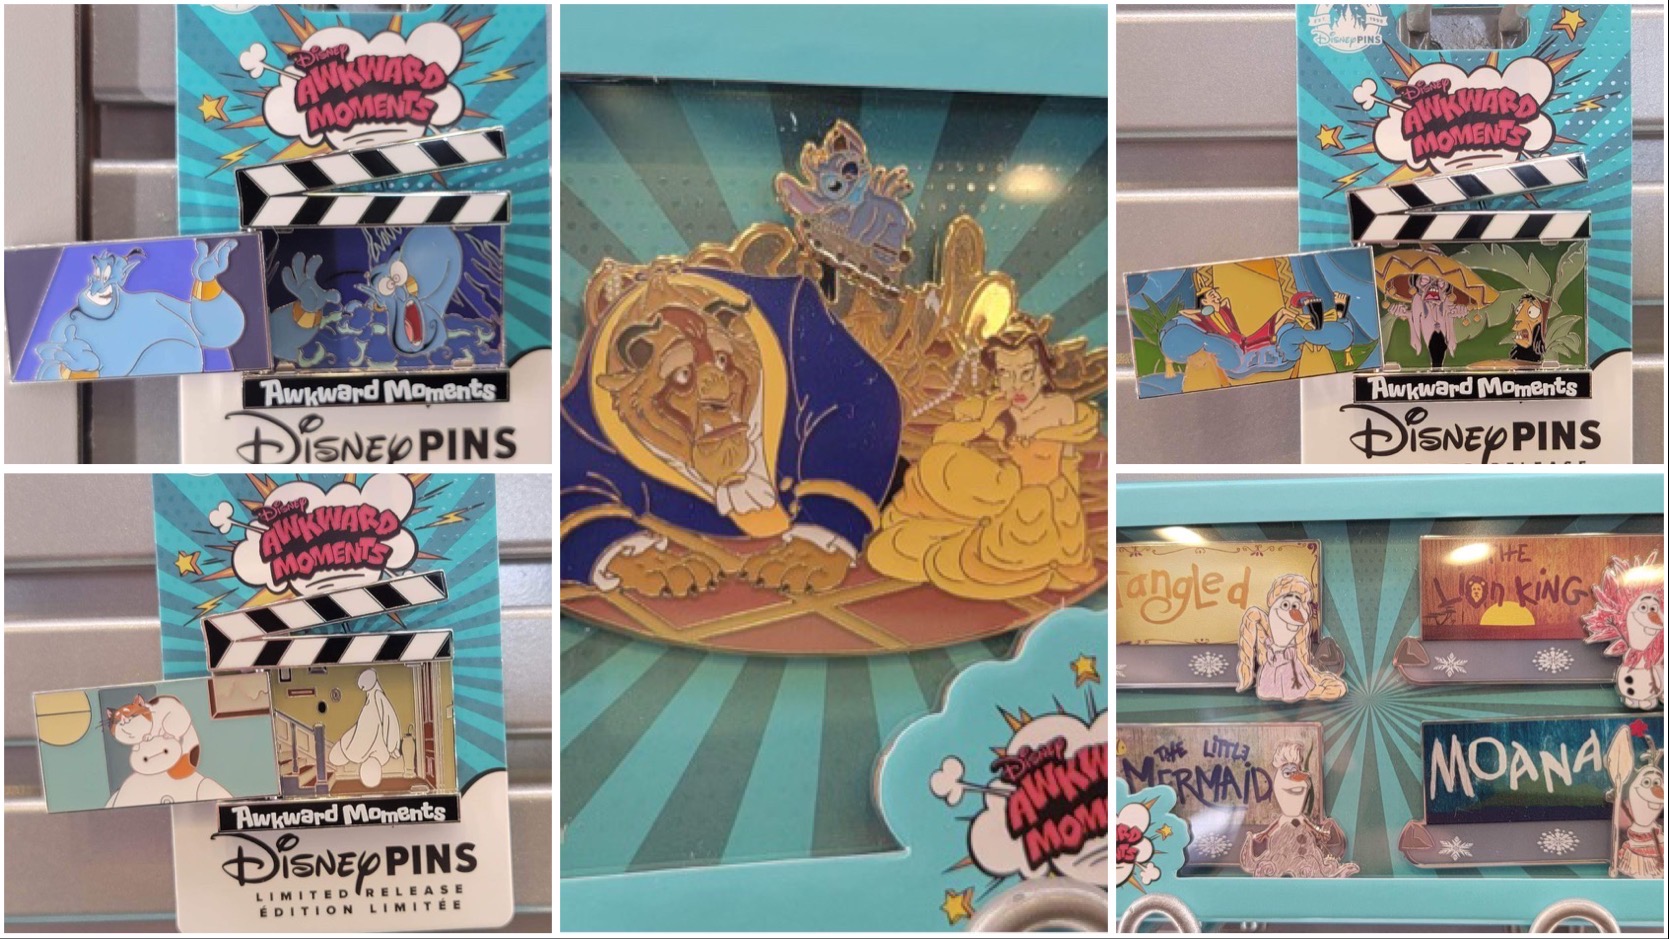 New Awkward Moments Pins Collection Available At Epcot!